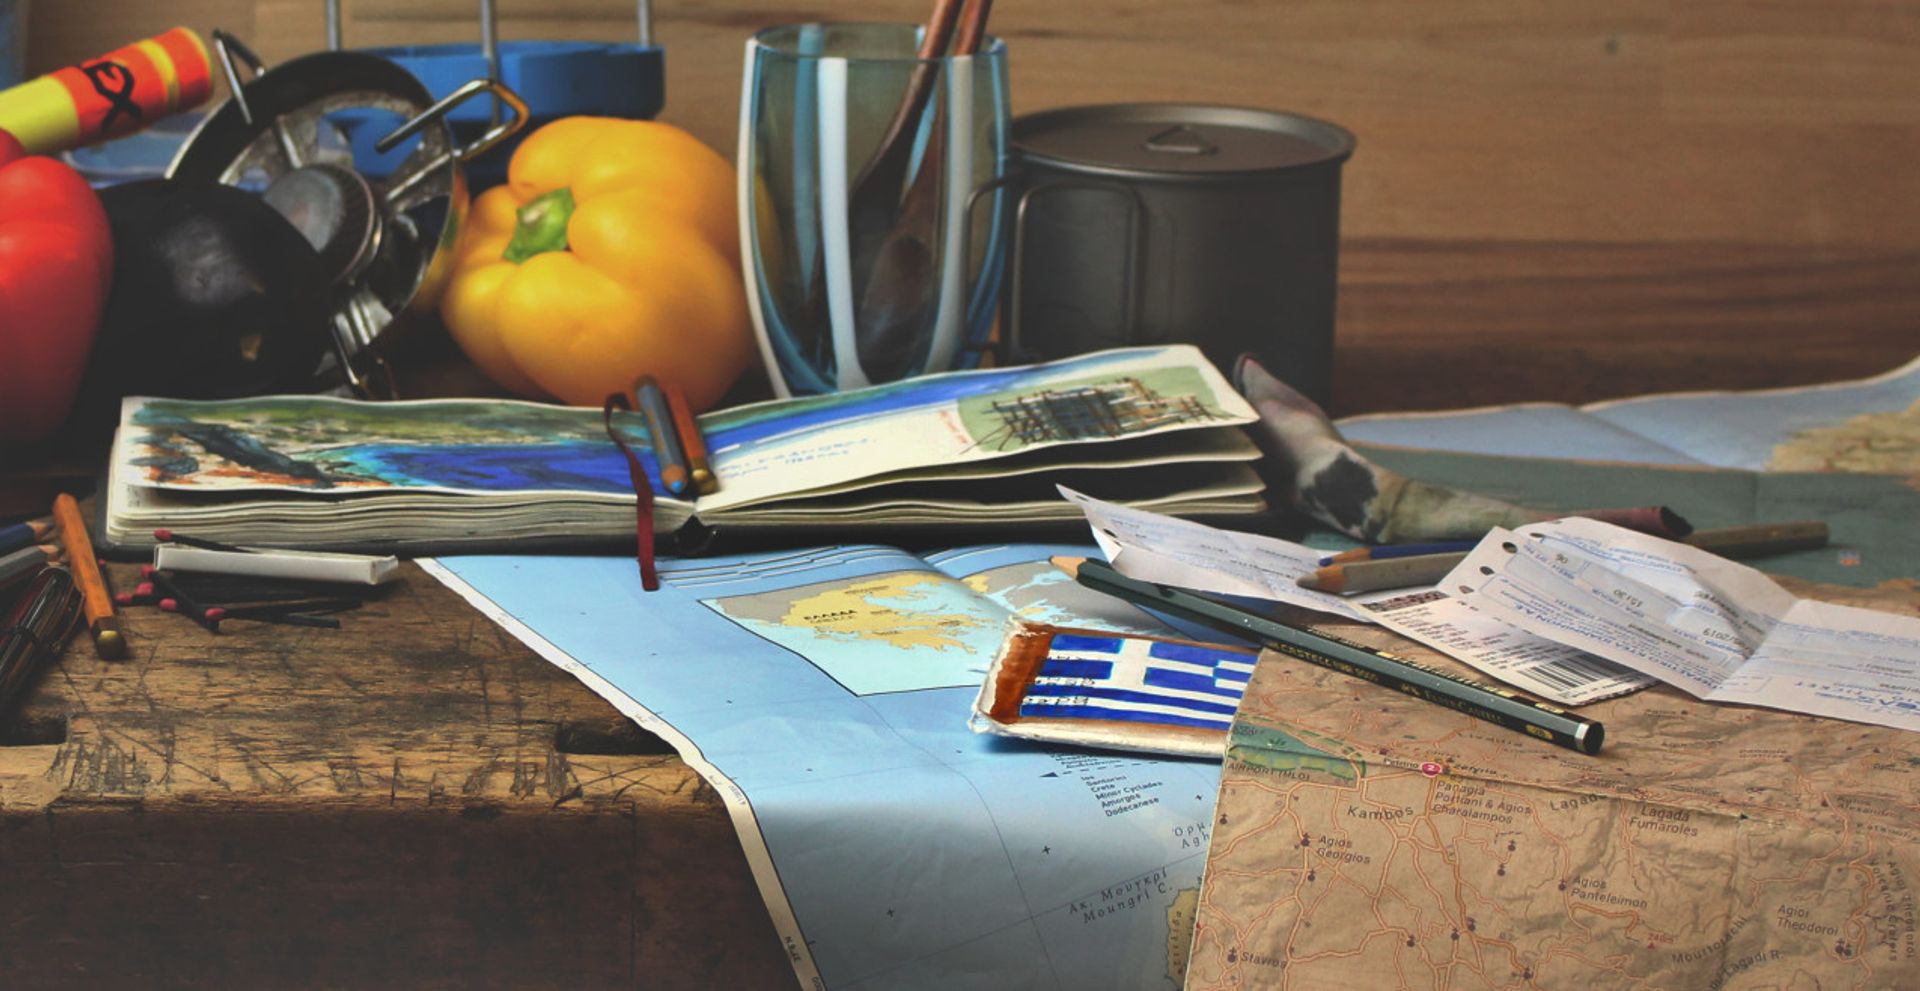 Maps of Greece, paprika, pencils and the sketchbook